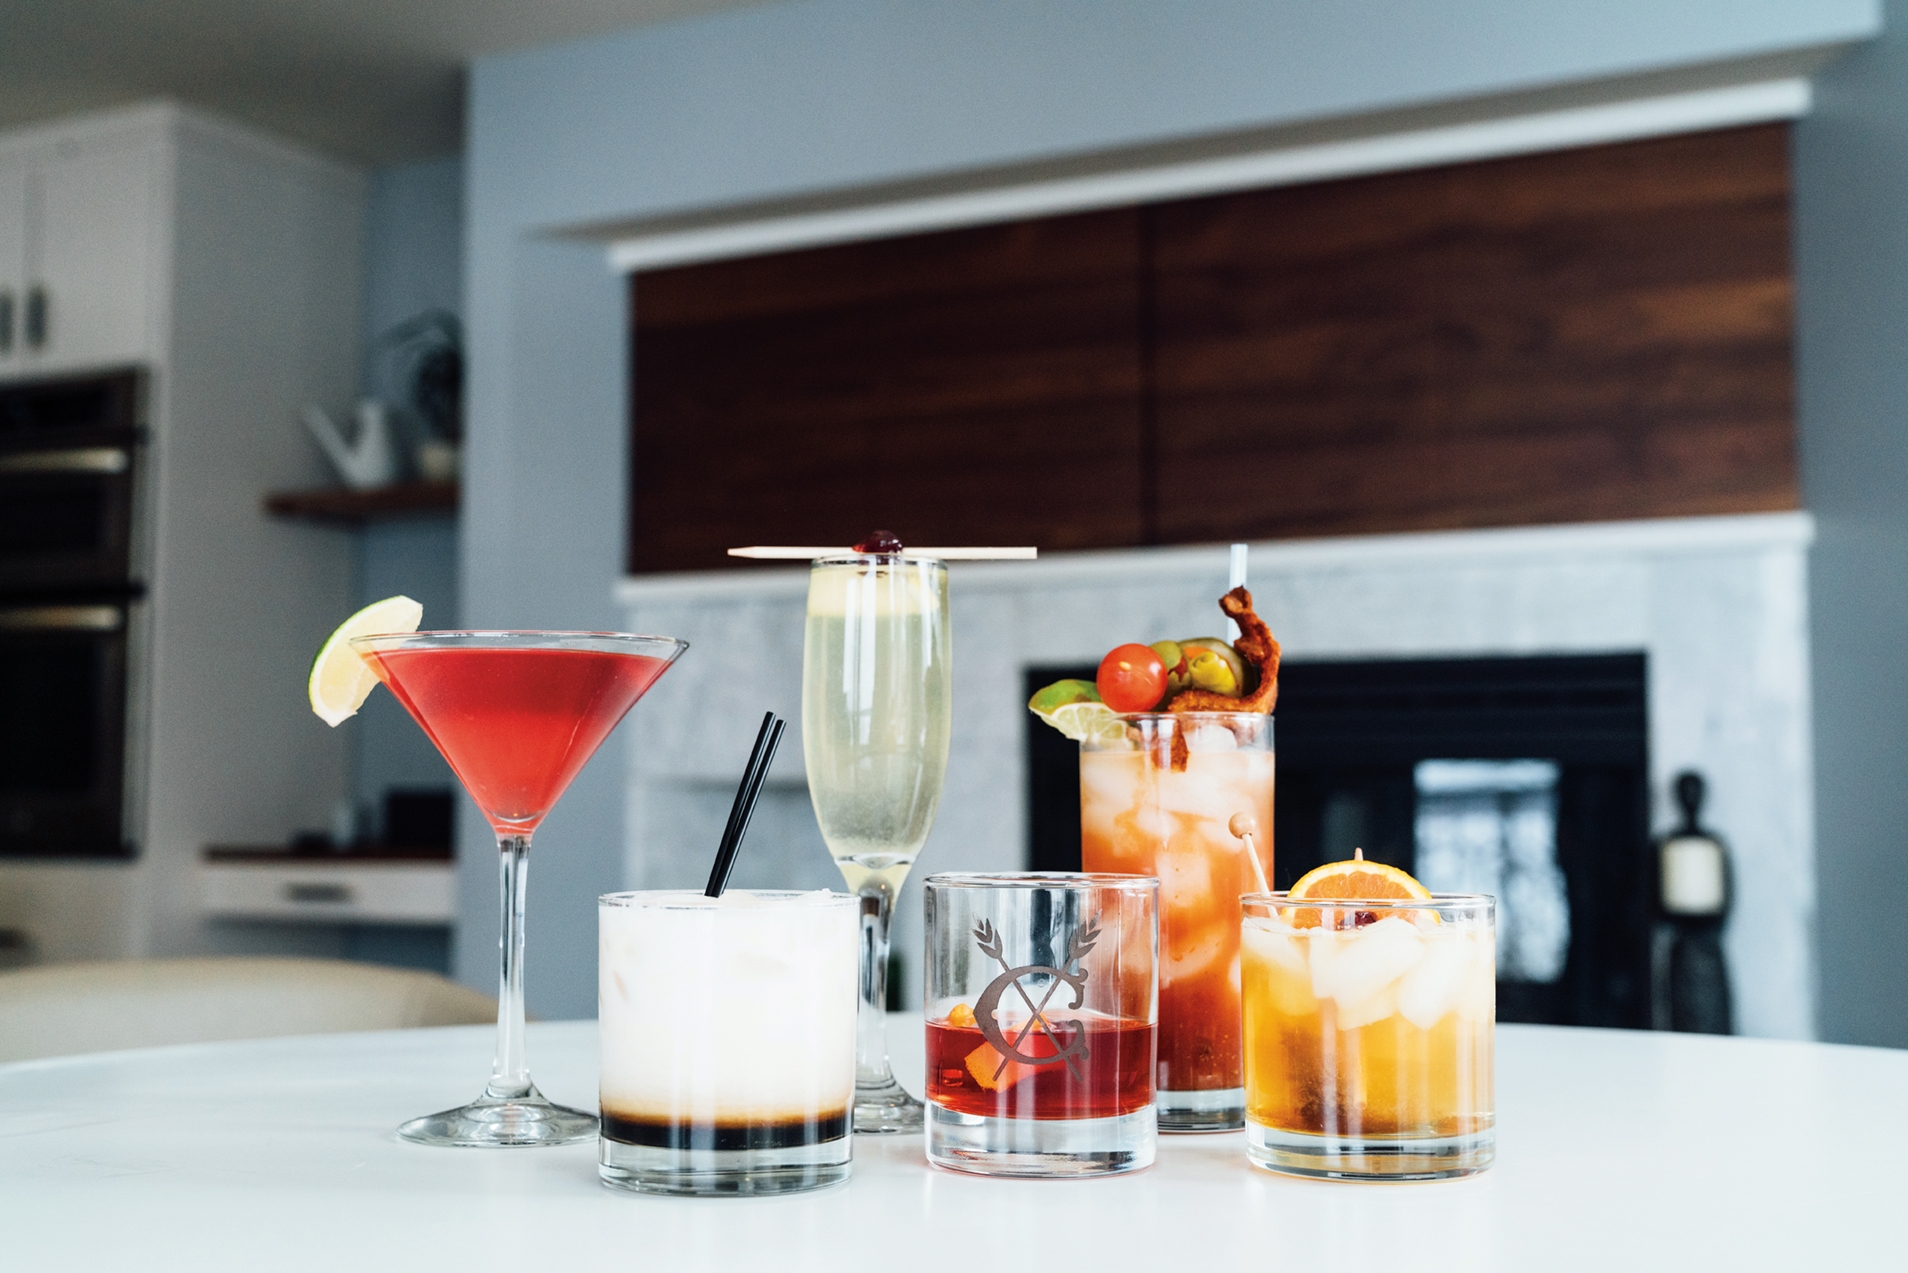 Muddle It, Mix It, Drink It: Shake up your weekend plans with cocktail classes in West Michigan